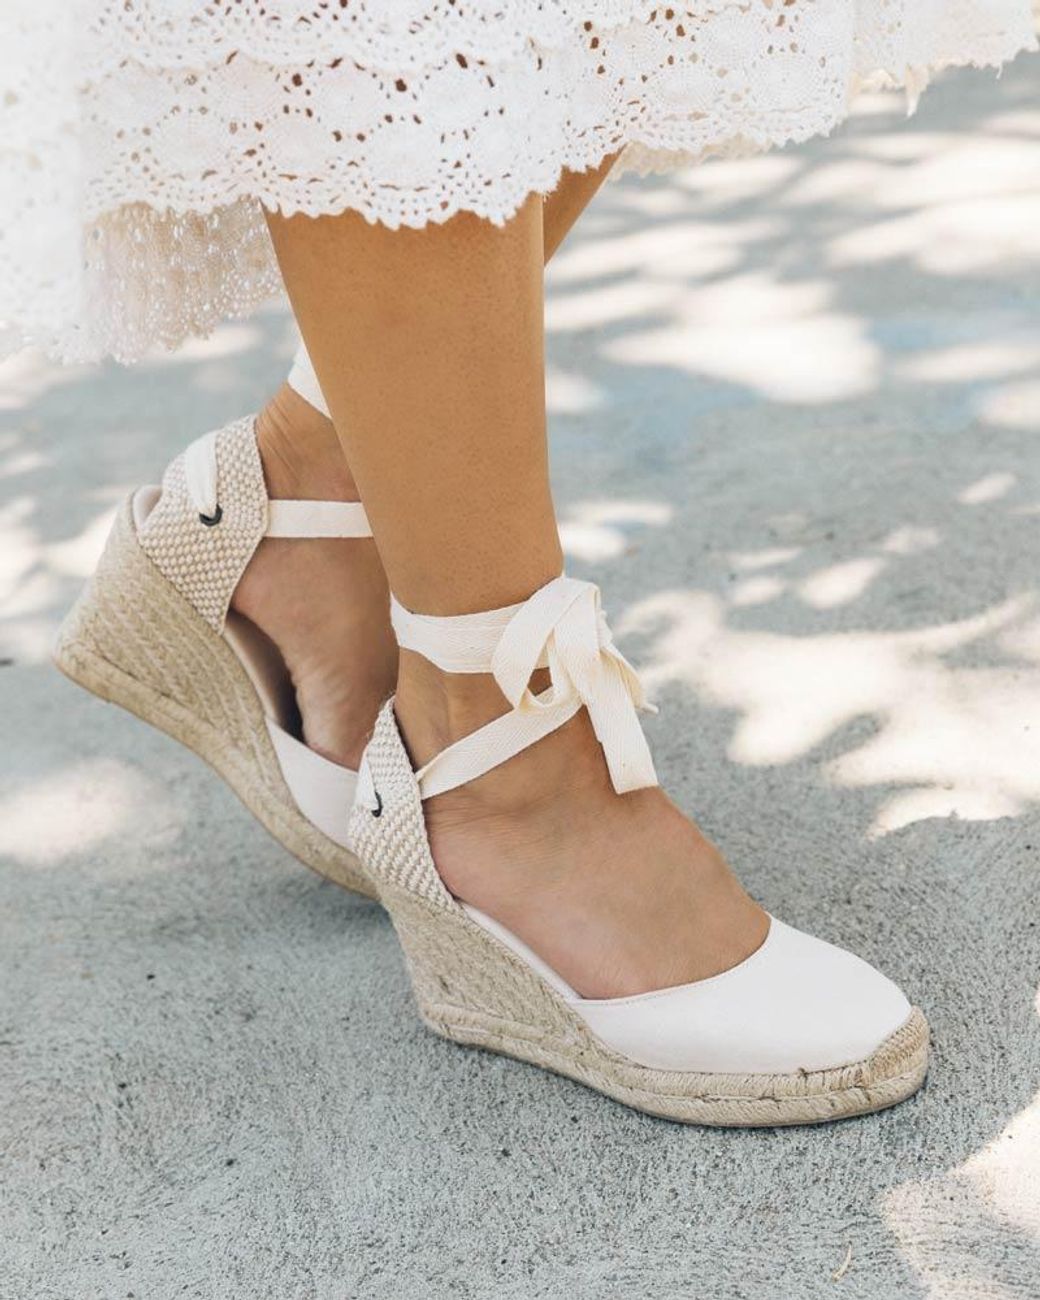 Soludos Classic 3.5" Wedge | Lyst